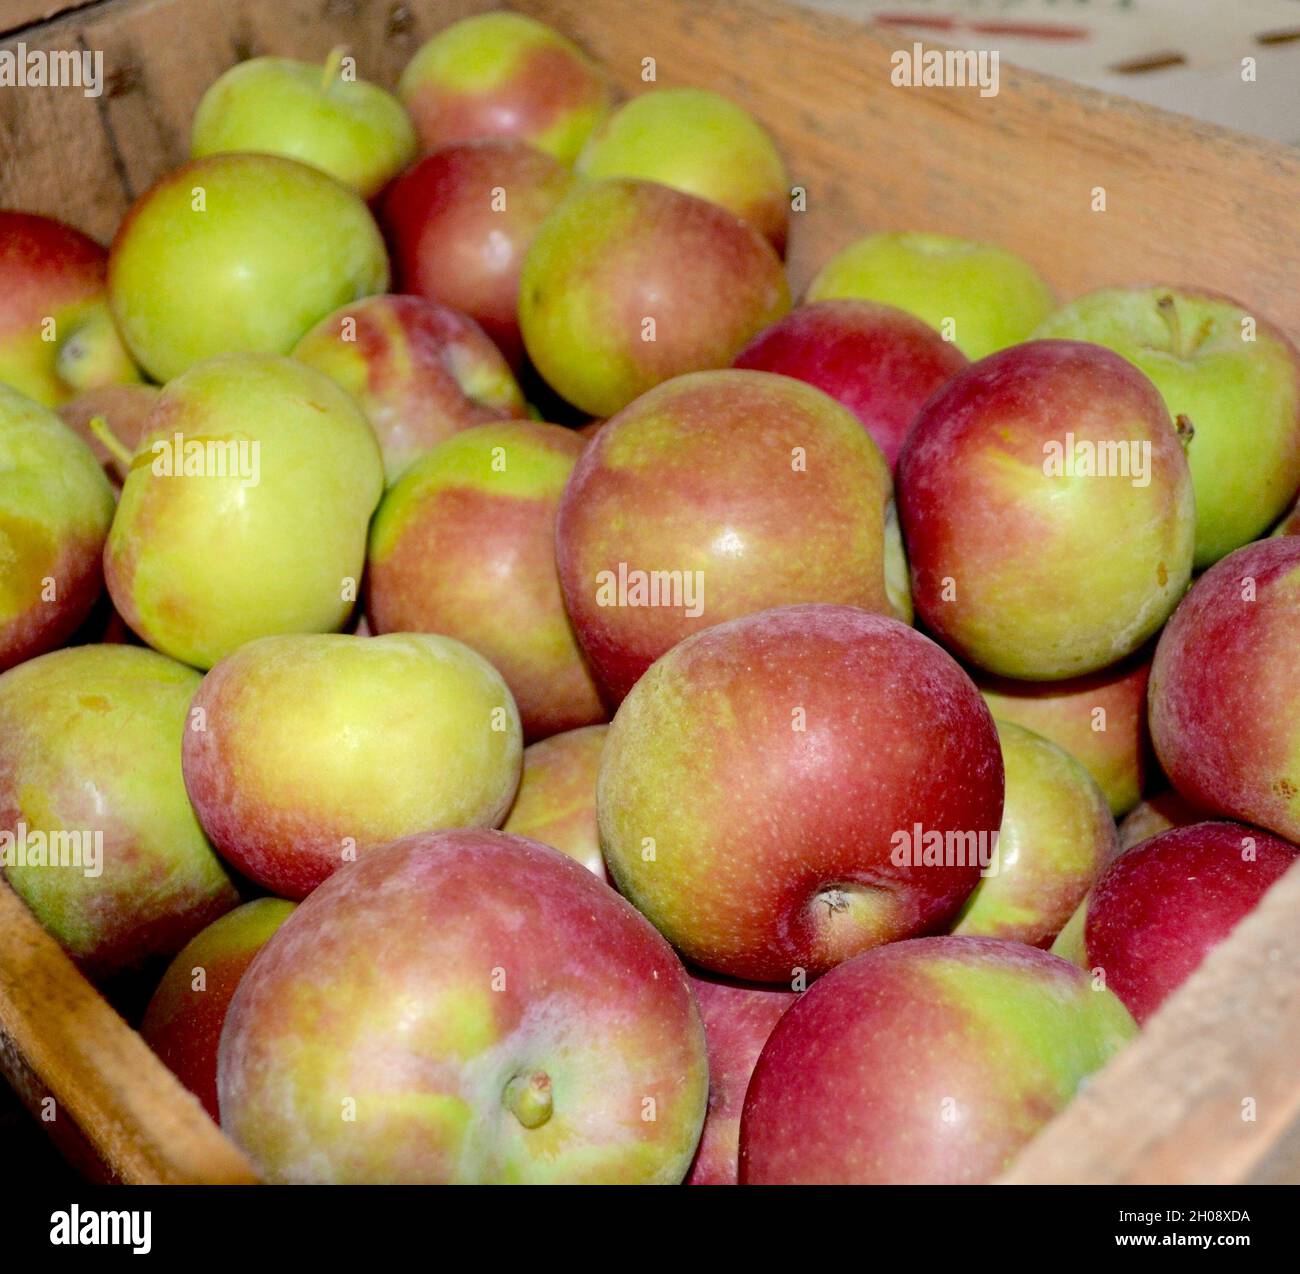 Crisp MacIntosh apples from New York's Hudson Valley shipped in a wooden box. Stock Photo